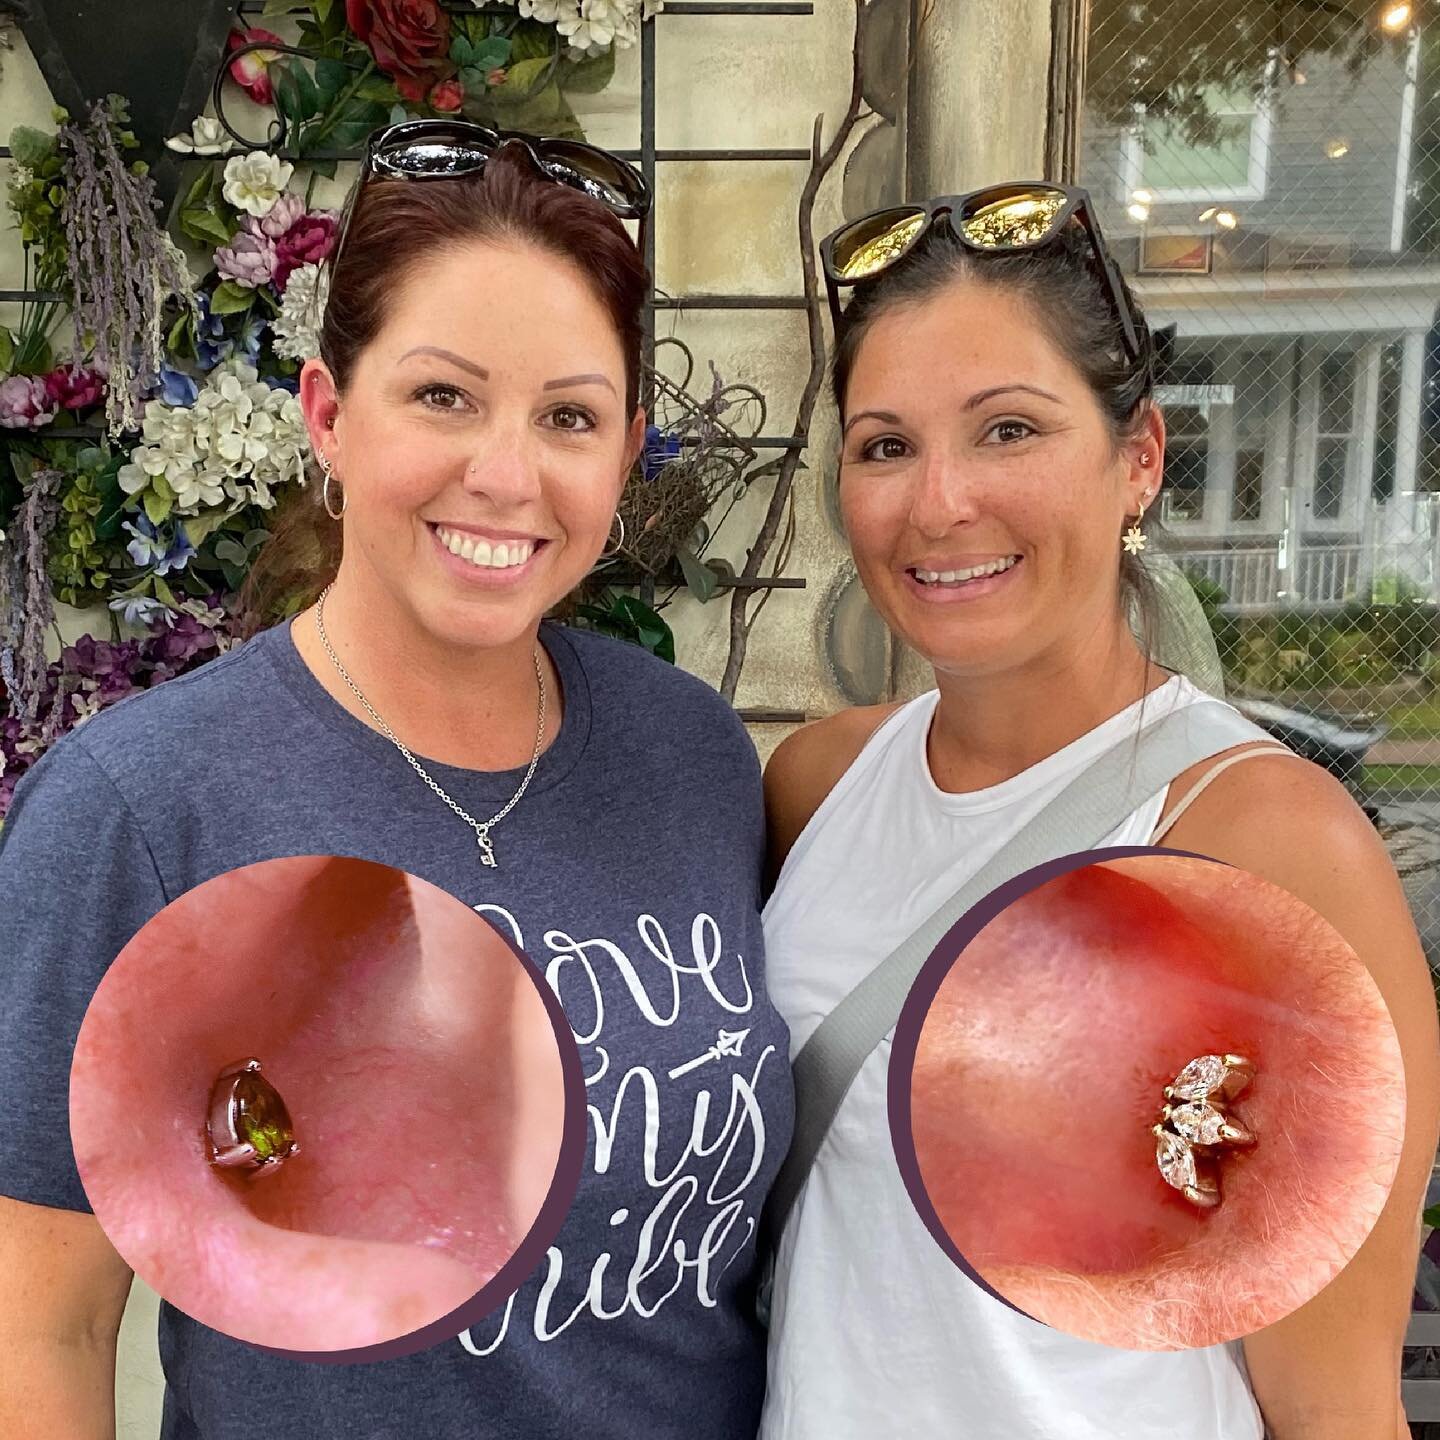 A set of conches for some friends. How cute! Tag who you wanna get matching piercings with 😲
.
.
.
.
.
.
.
.
.
.
#conch #conchpiercing #earpiercing #cartilagepiercing #curatedear #safepiercing #finejewelry #bodyjewelry #savannahpiercing #planet3 #pl